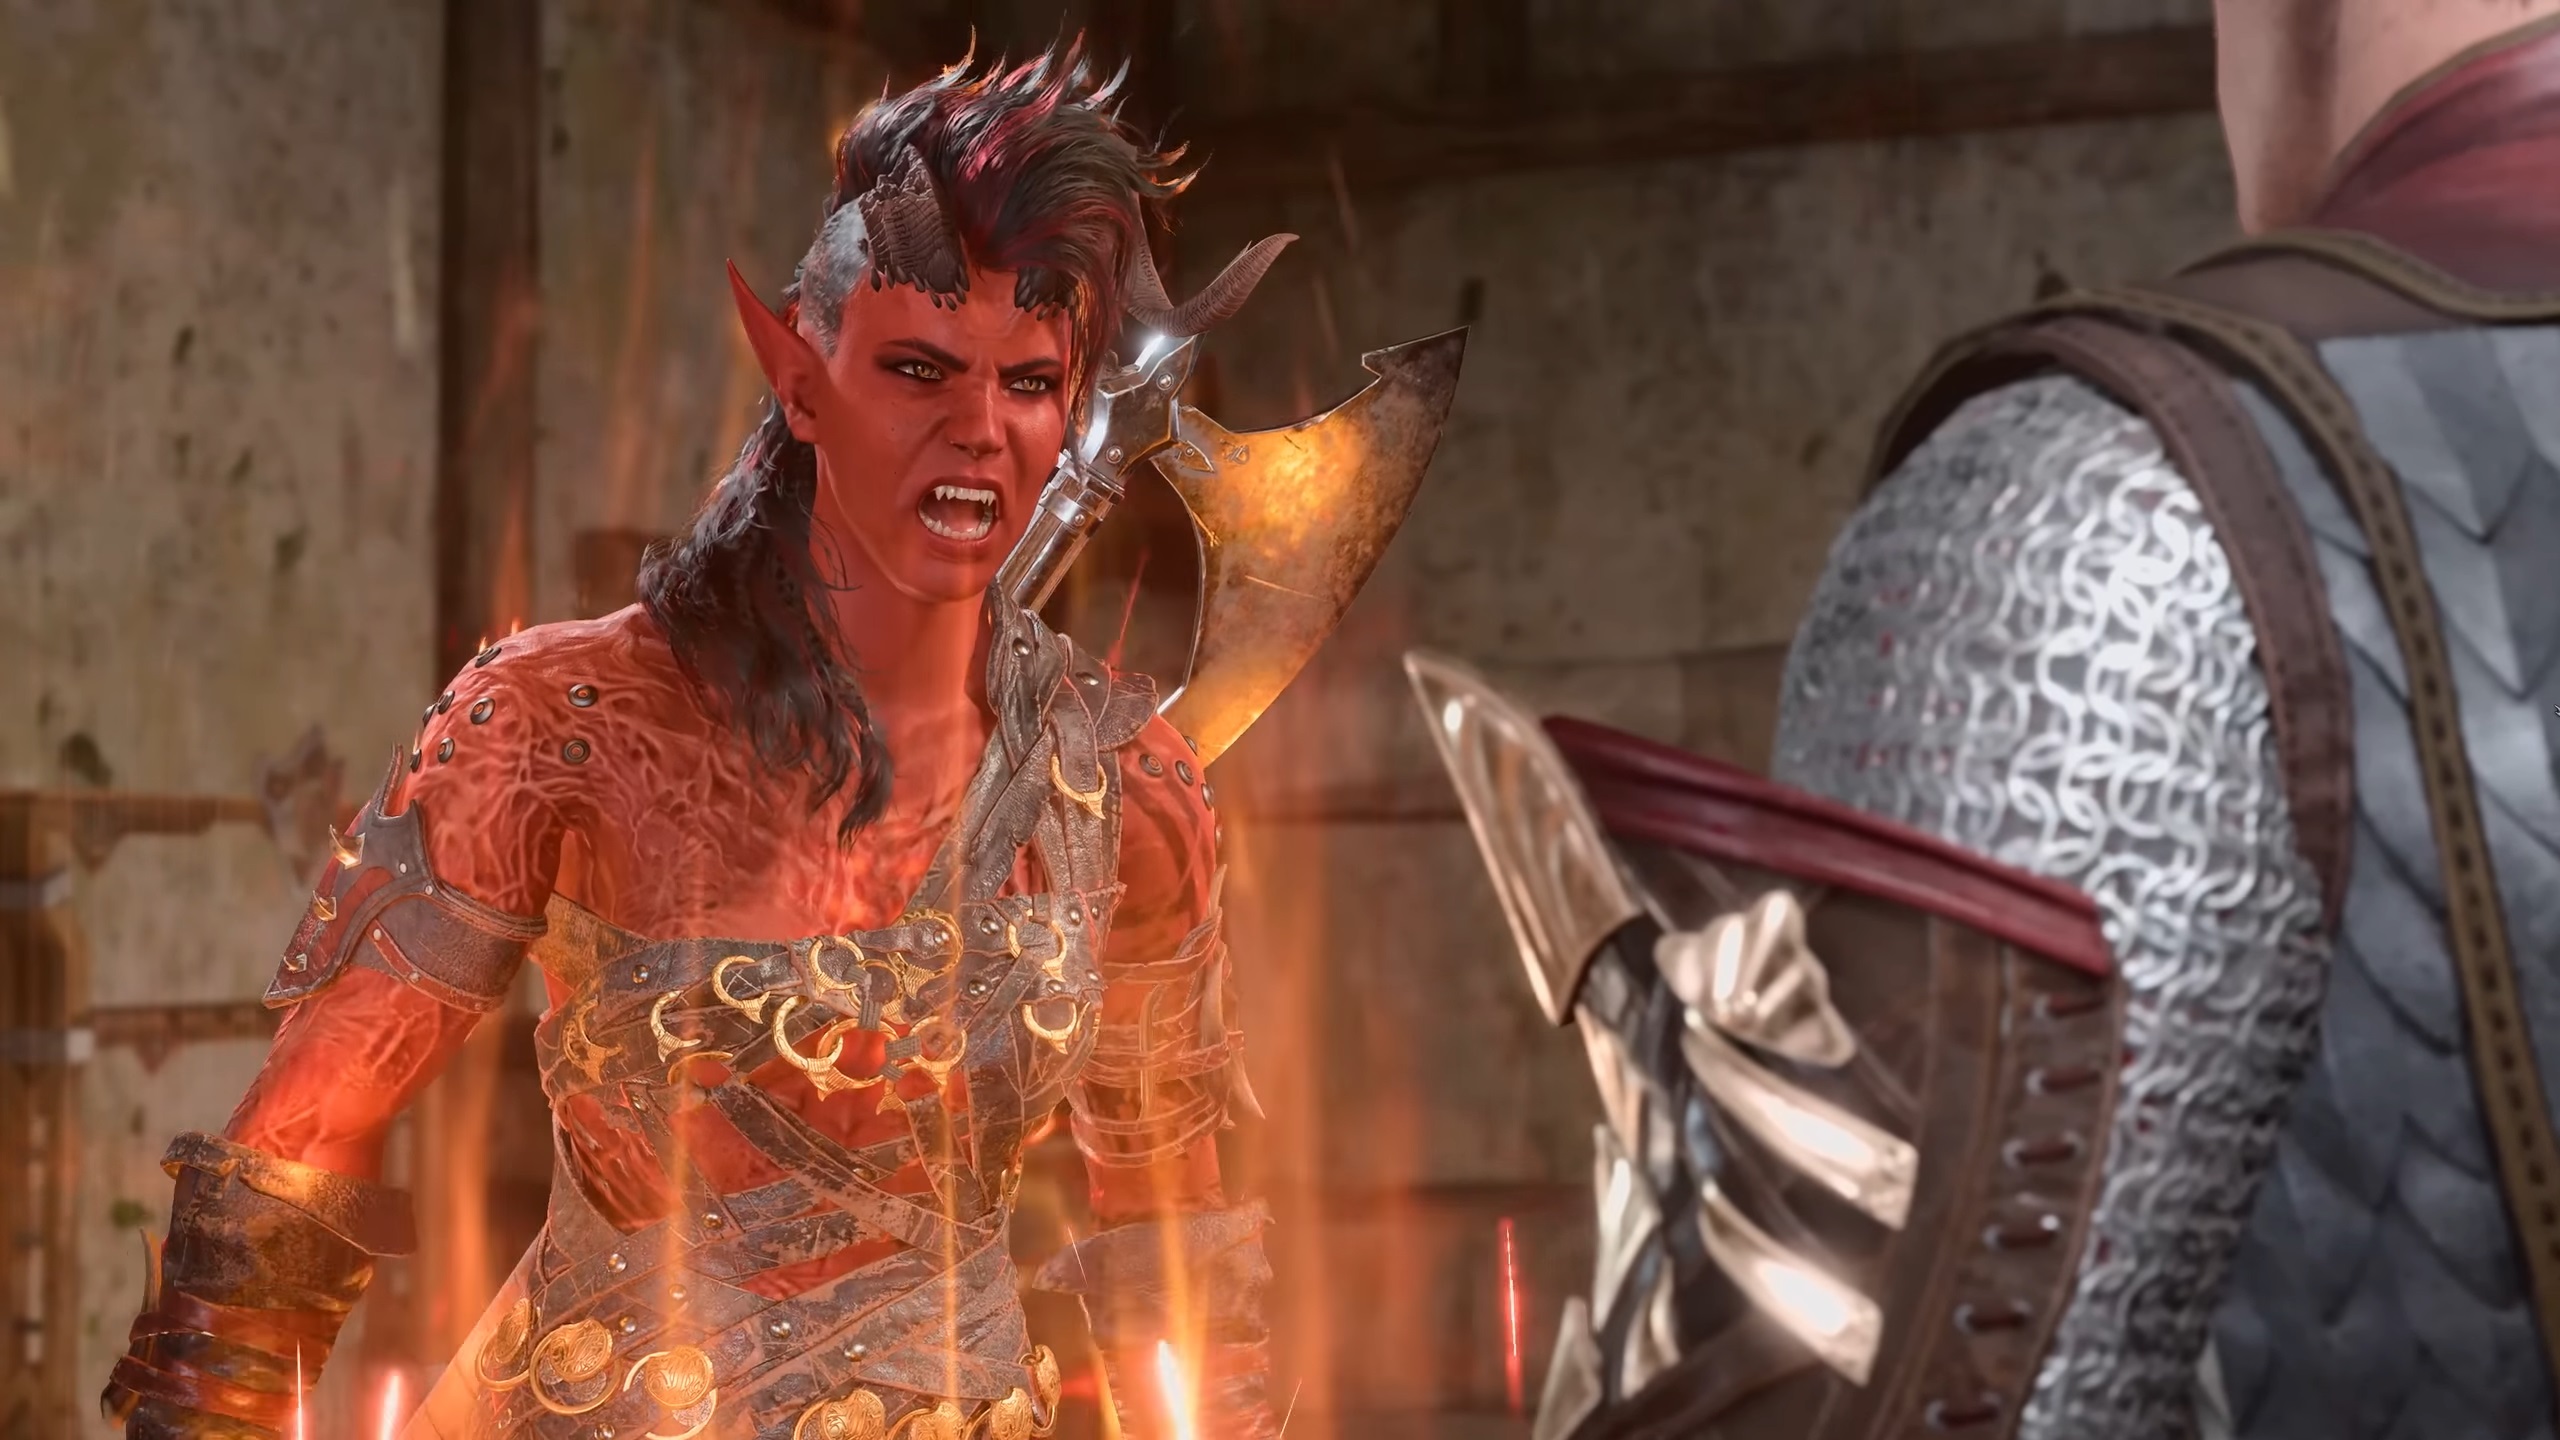 tiefling glowing and screaming at the camera